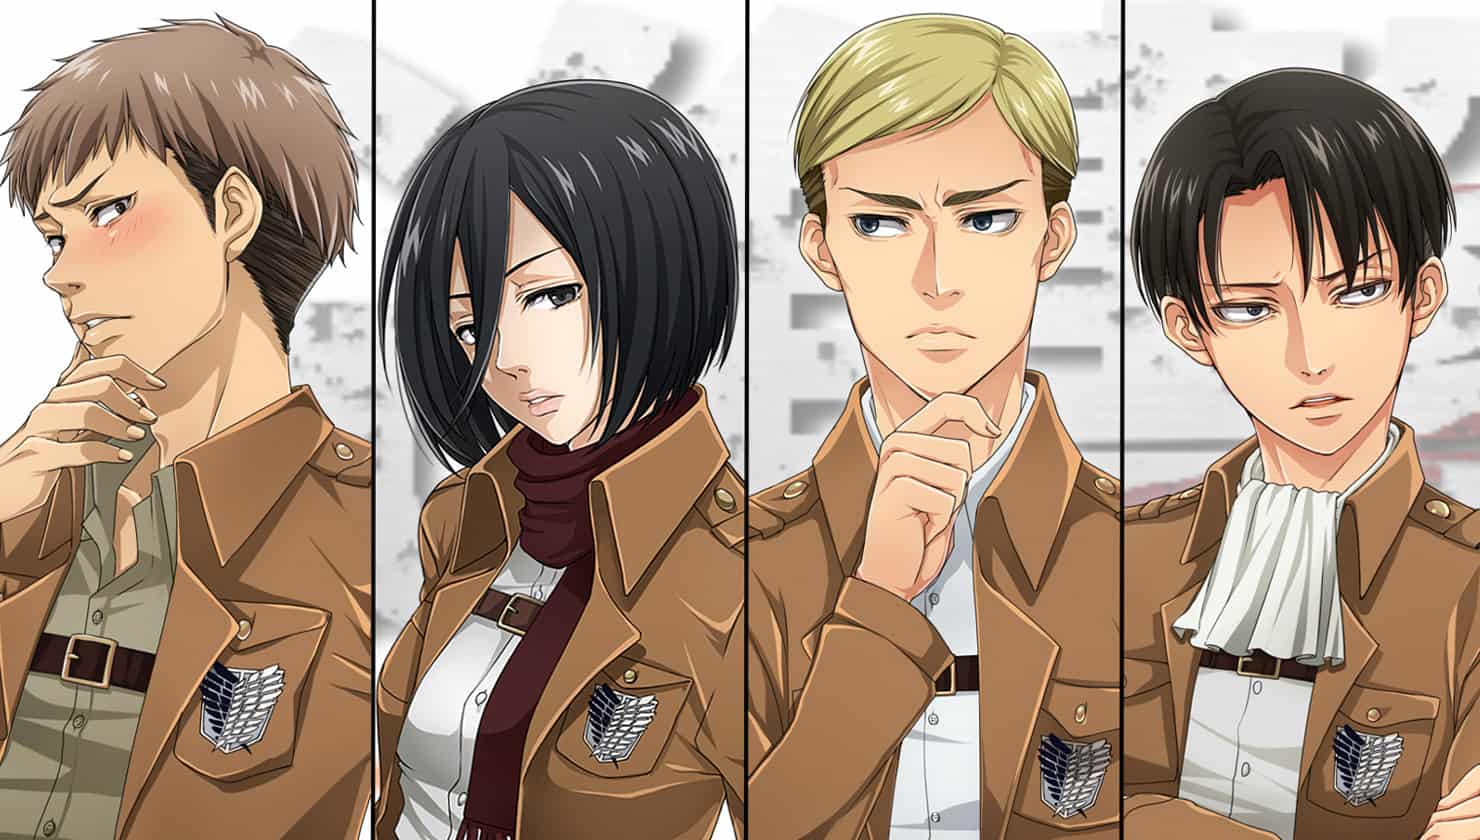 Which Titan from Attack on Titan are you?